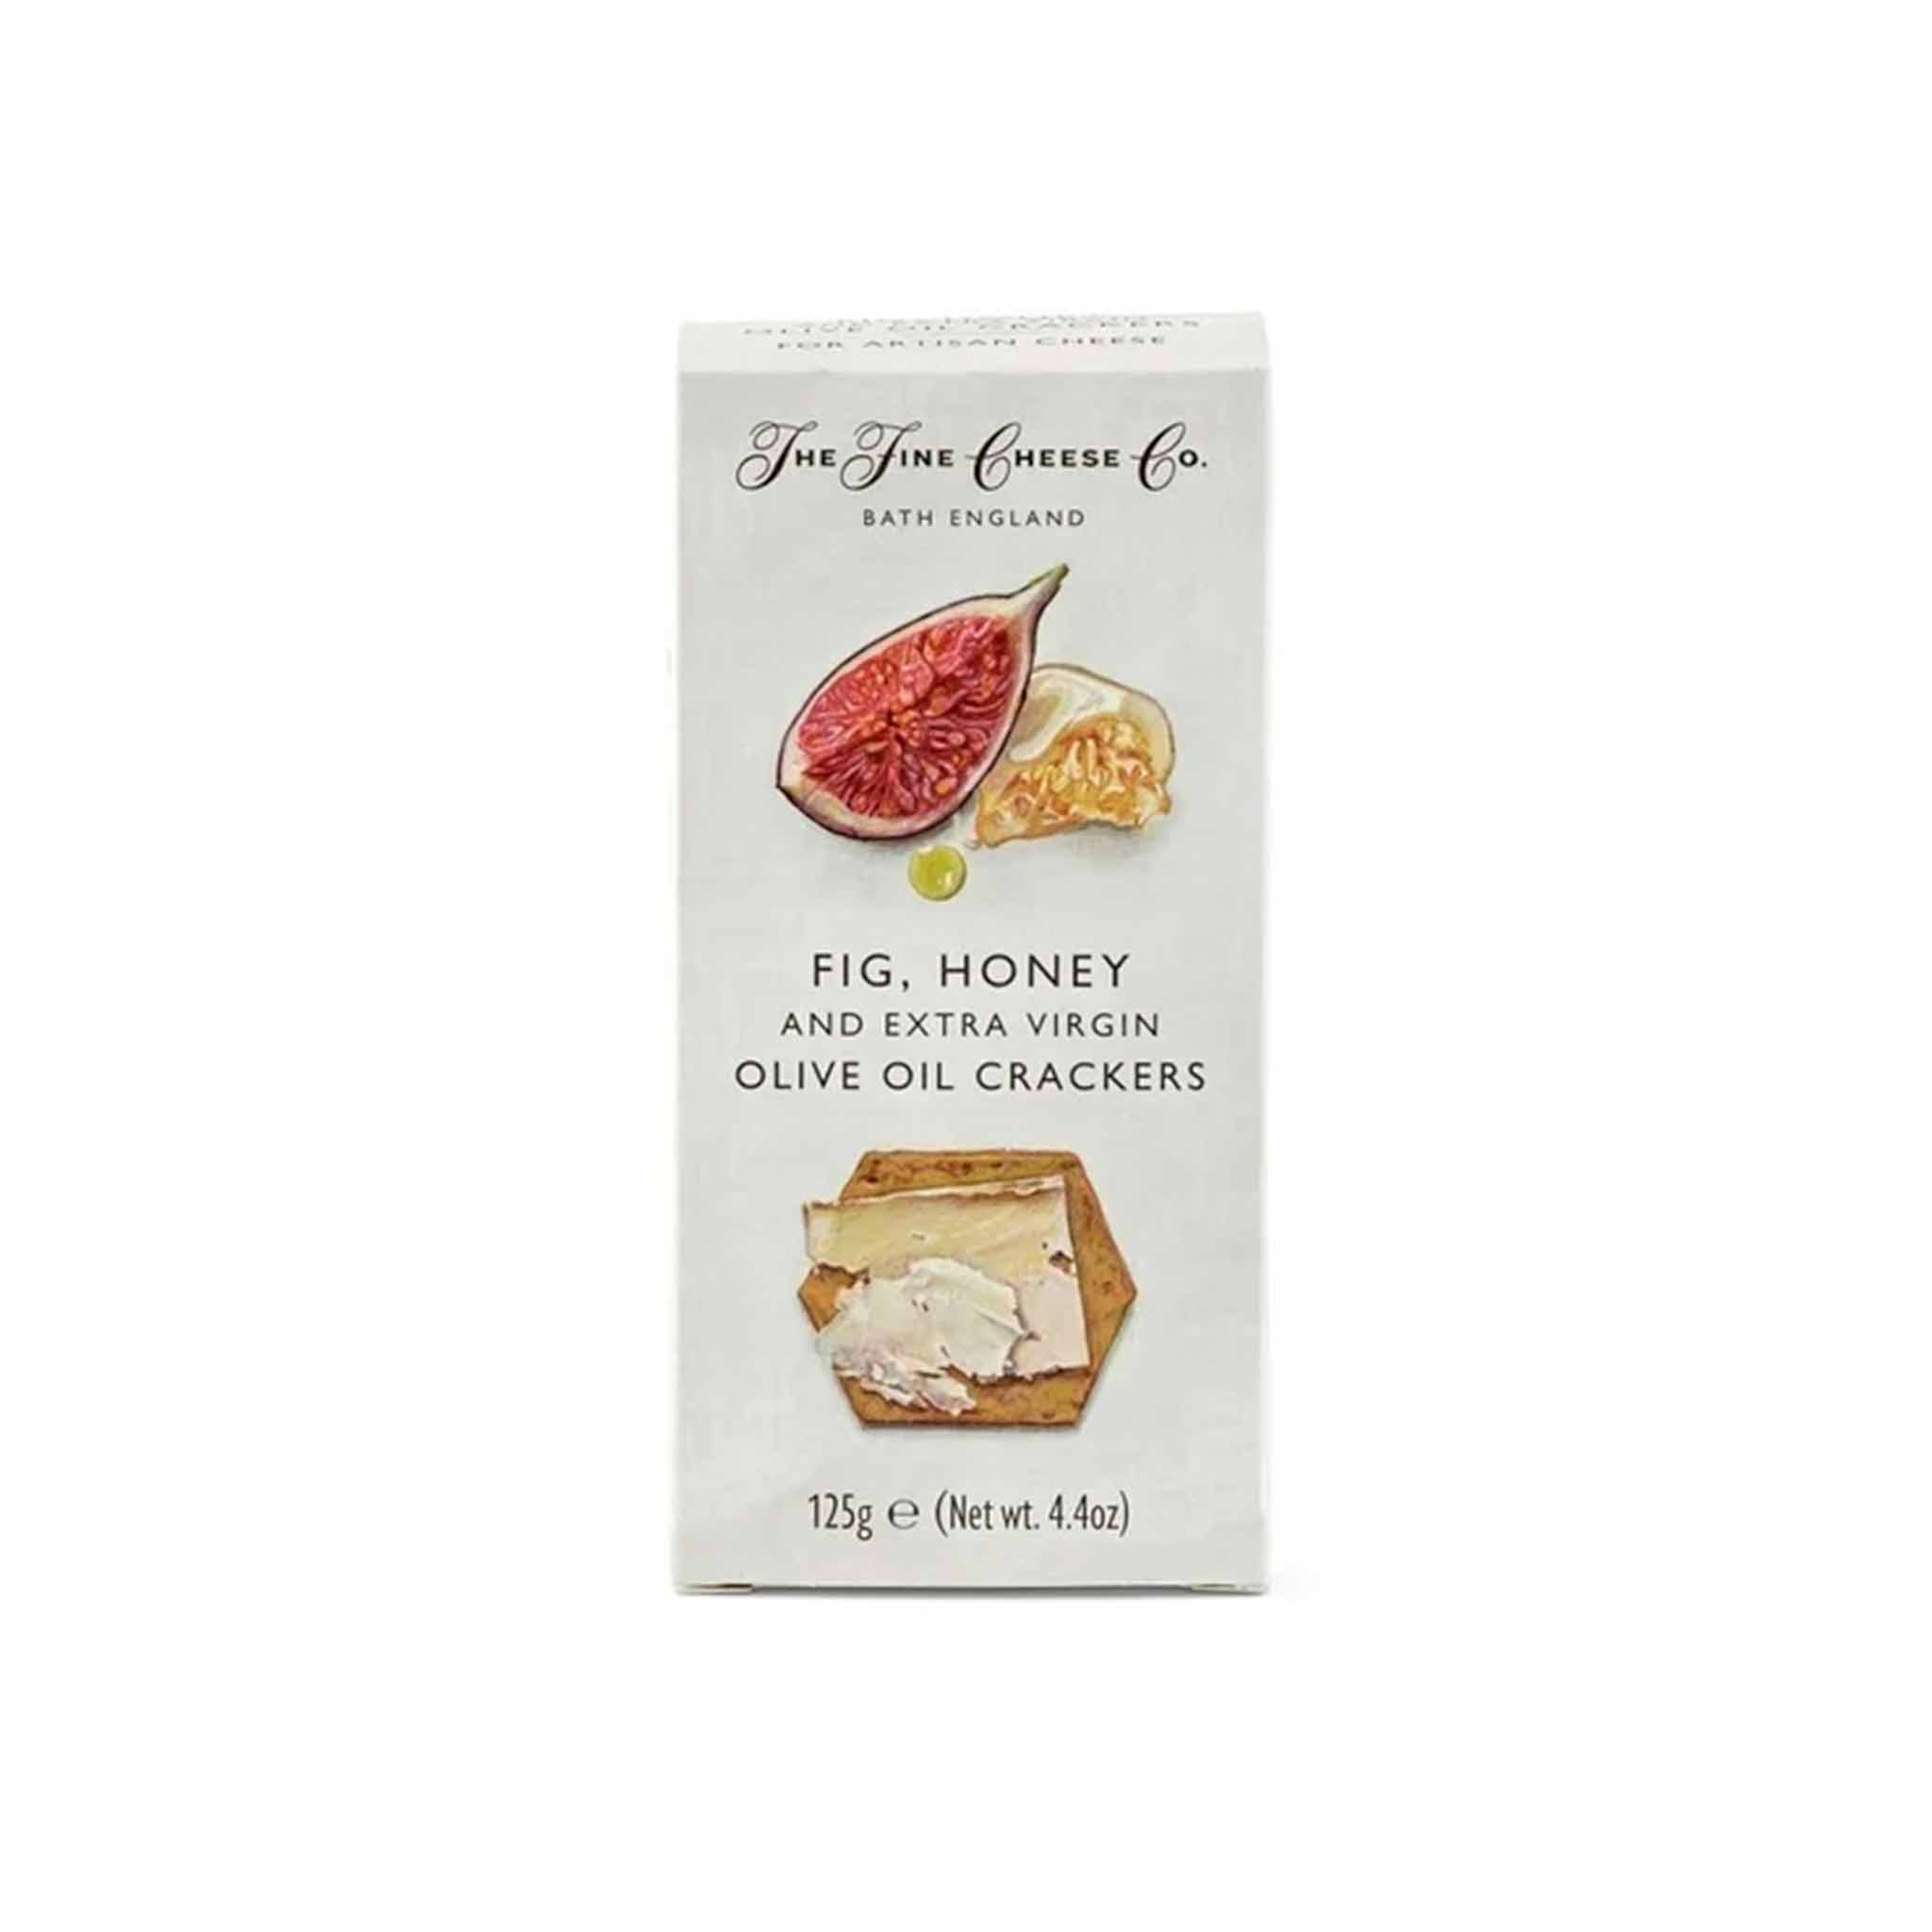 THE FINE CHEESE CO. FIG, HONEY & OLIVE OIL CRACKERS 125g